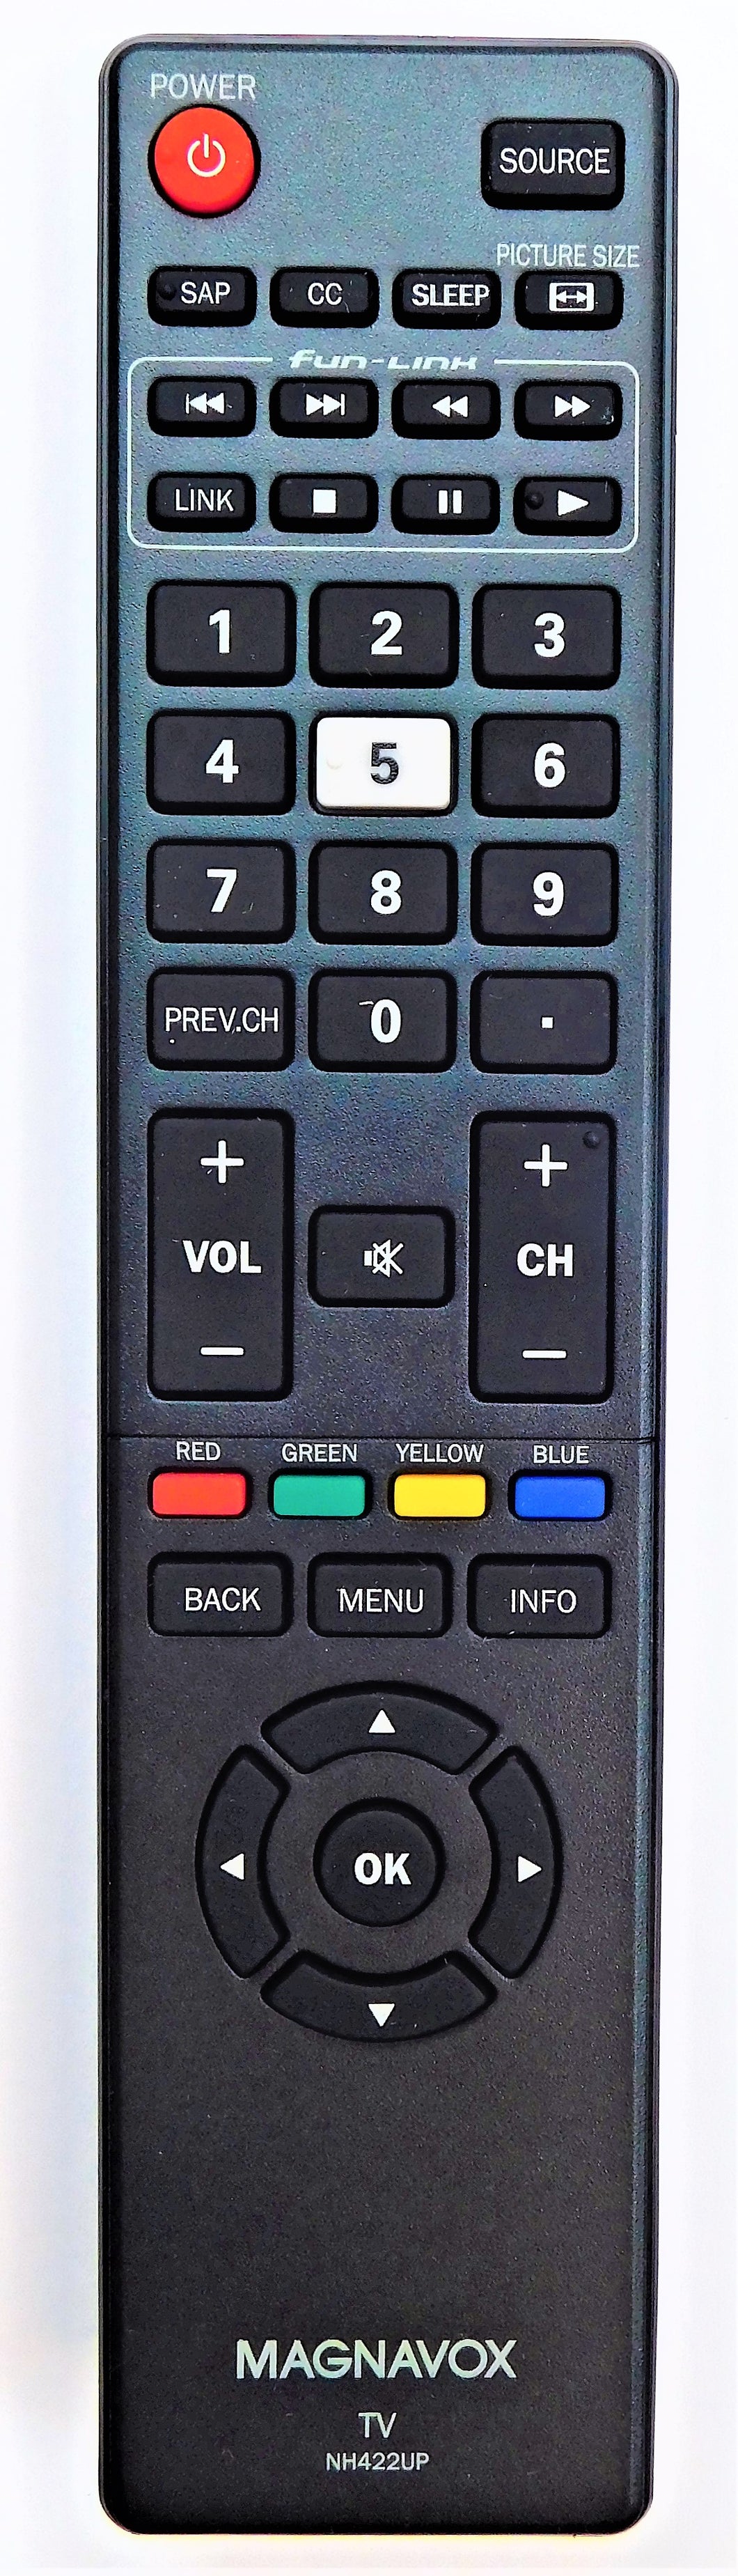 OEM replacement remote control for Magnavox LED/LCD TV NH422UP